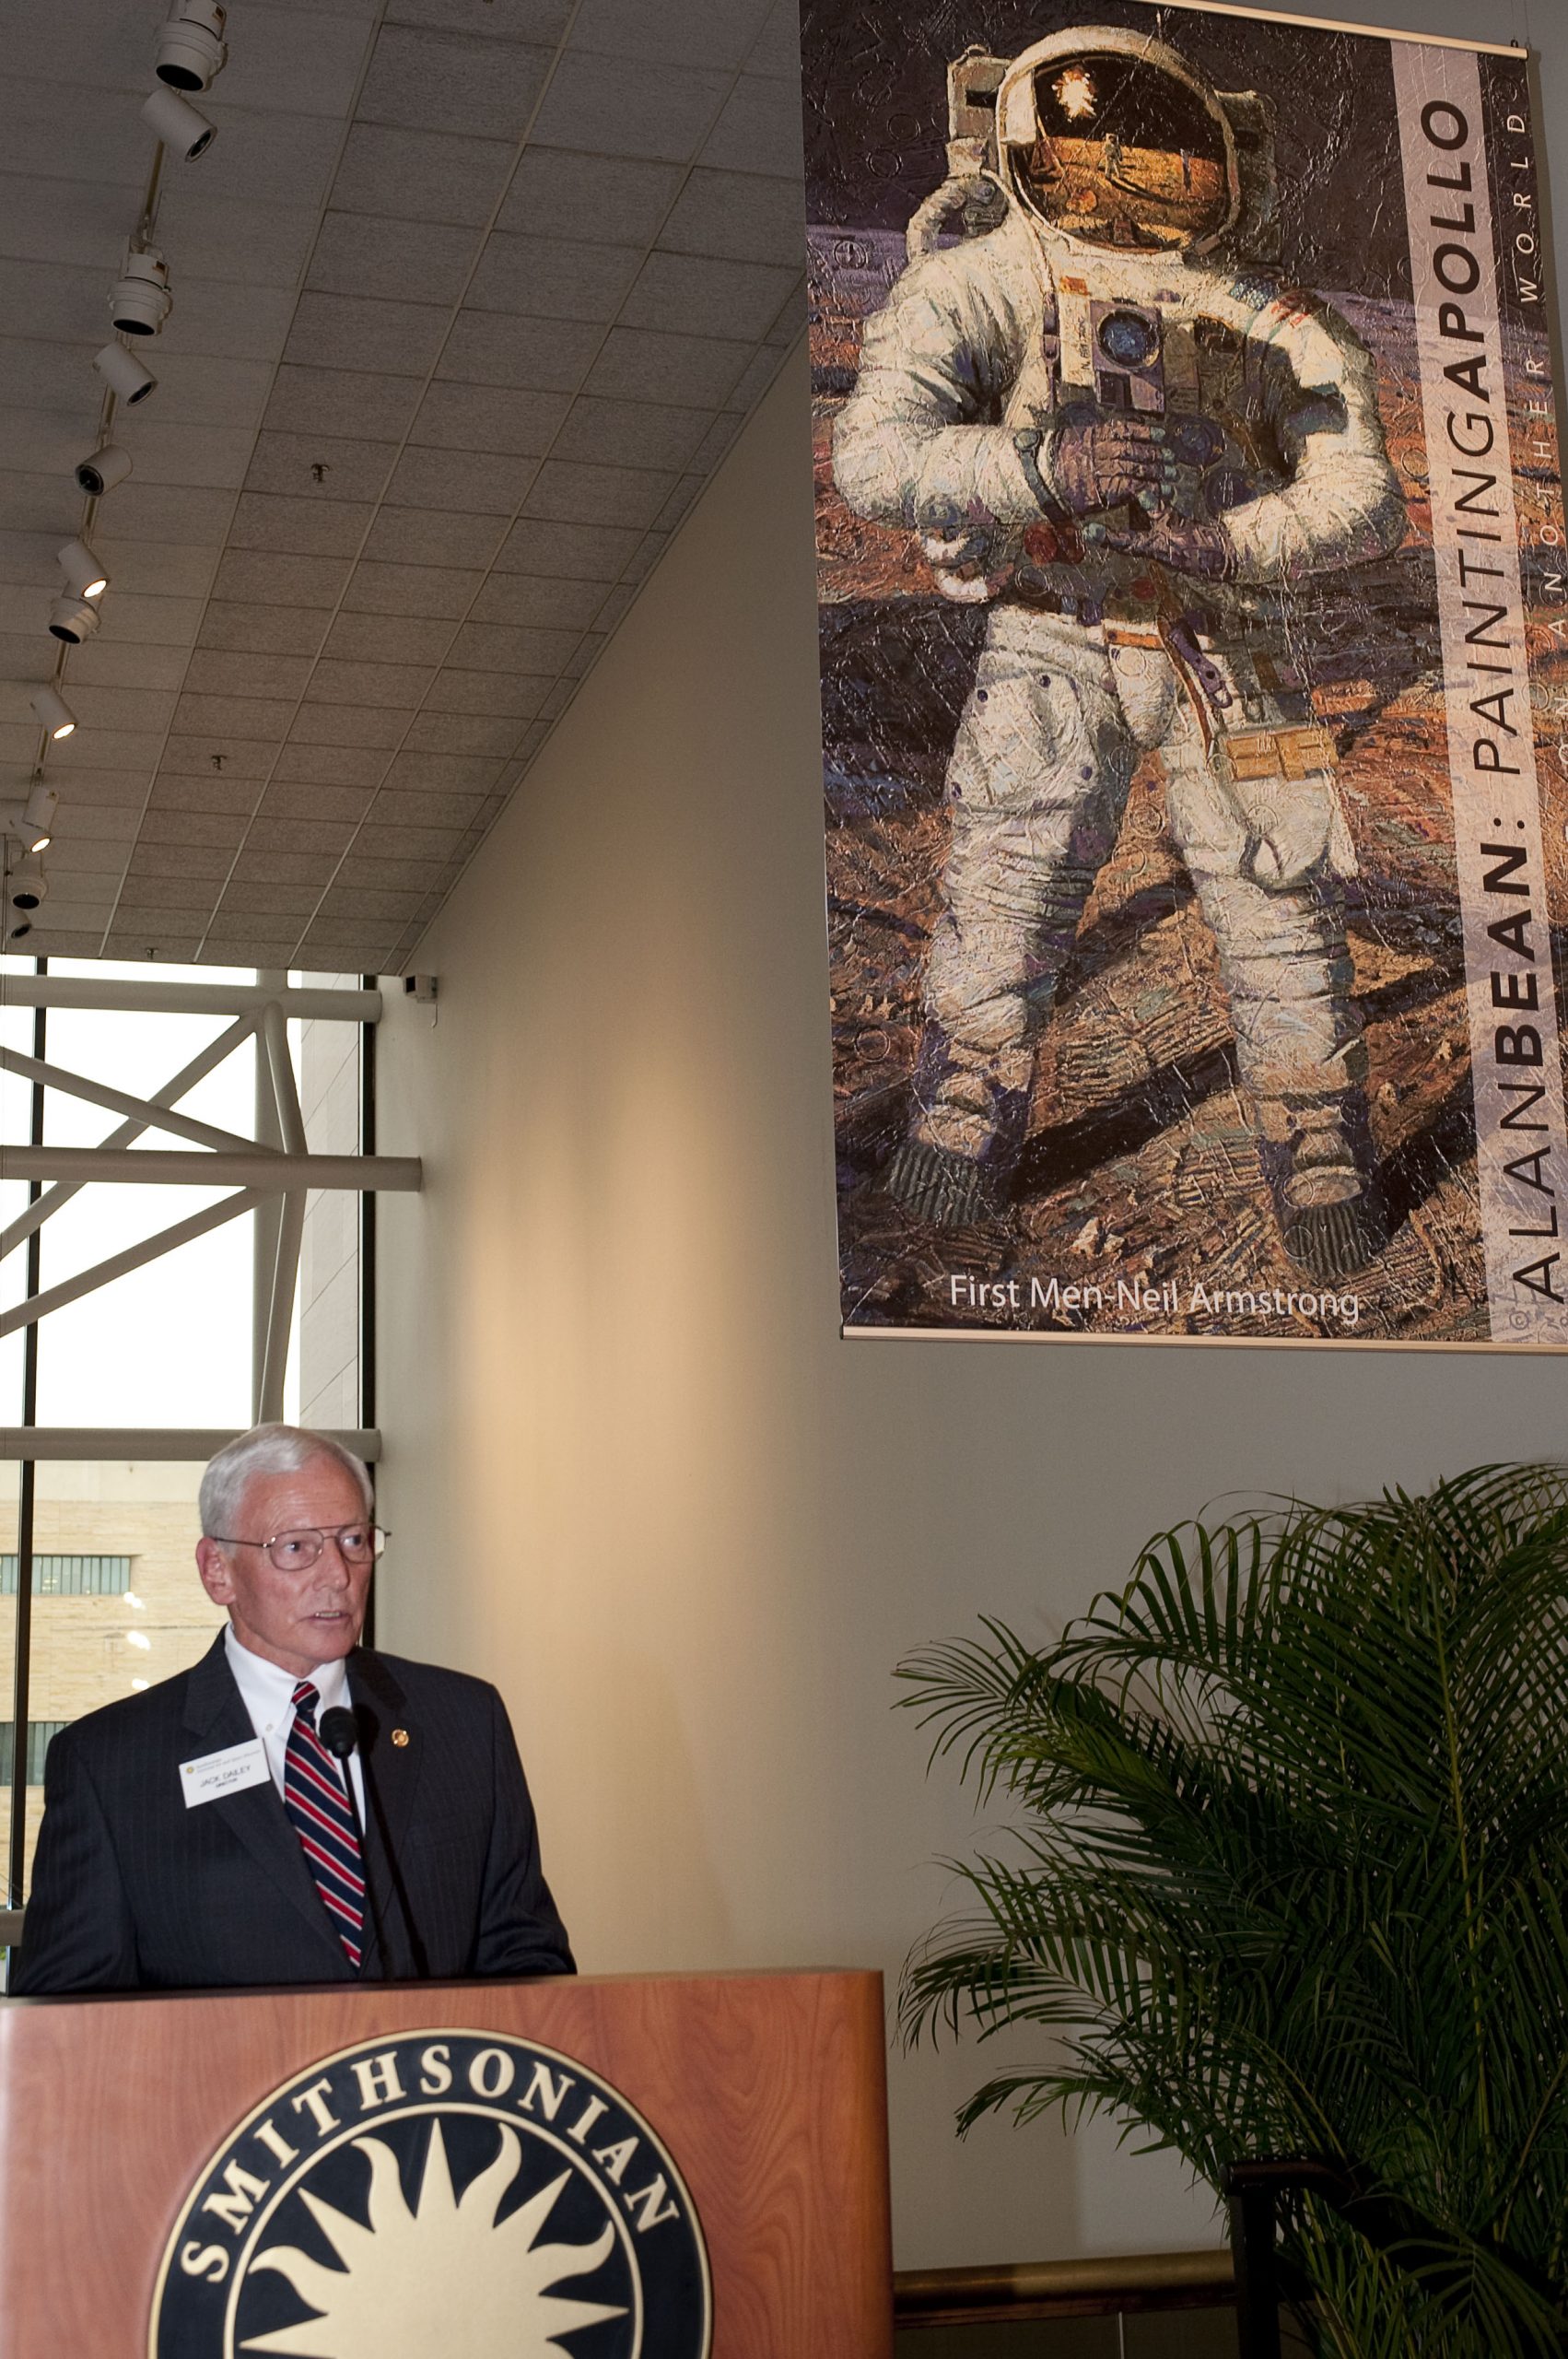 The Opening of First Artist of Another World, Smithsonian Air and Space Museum, 2009